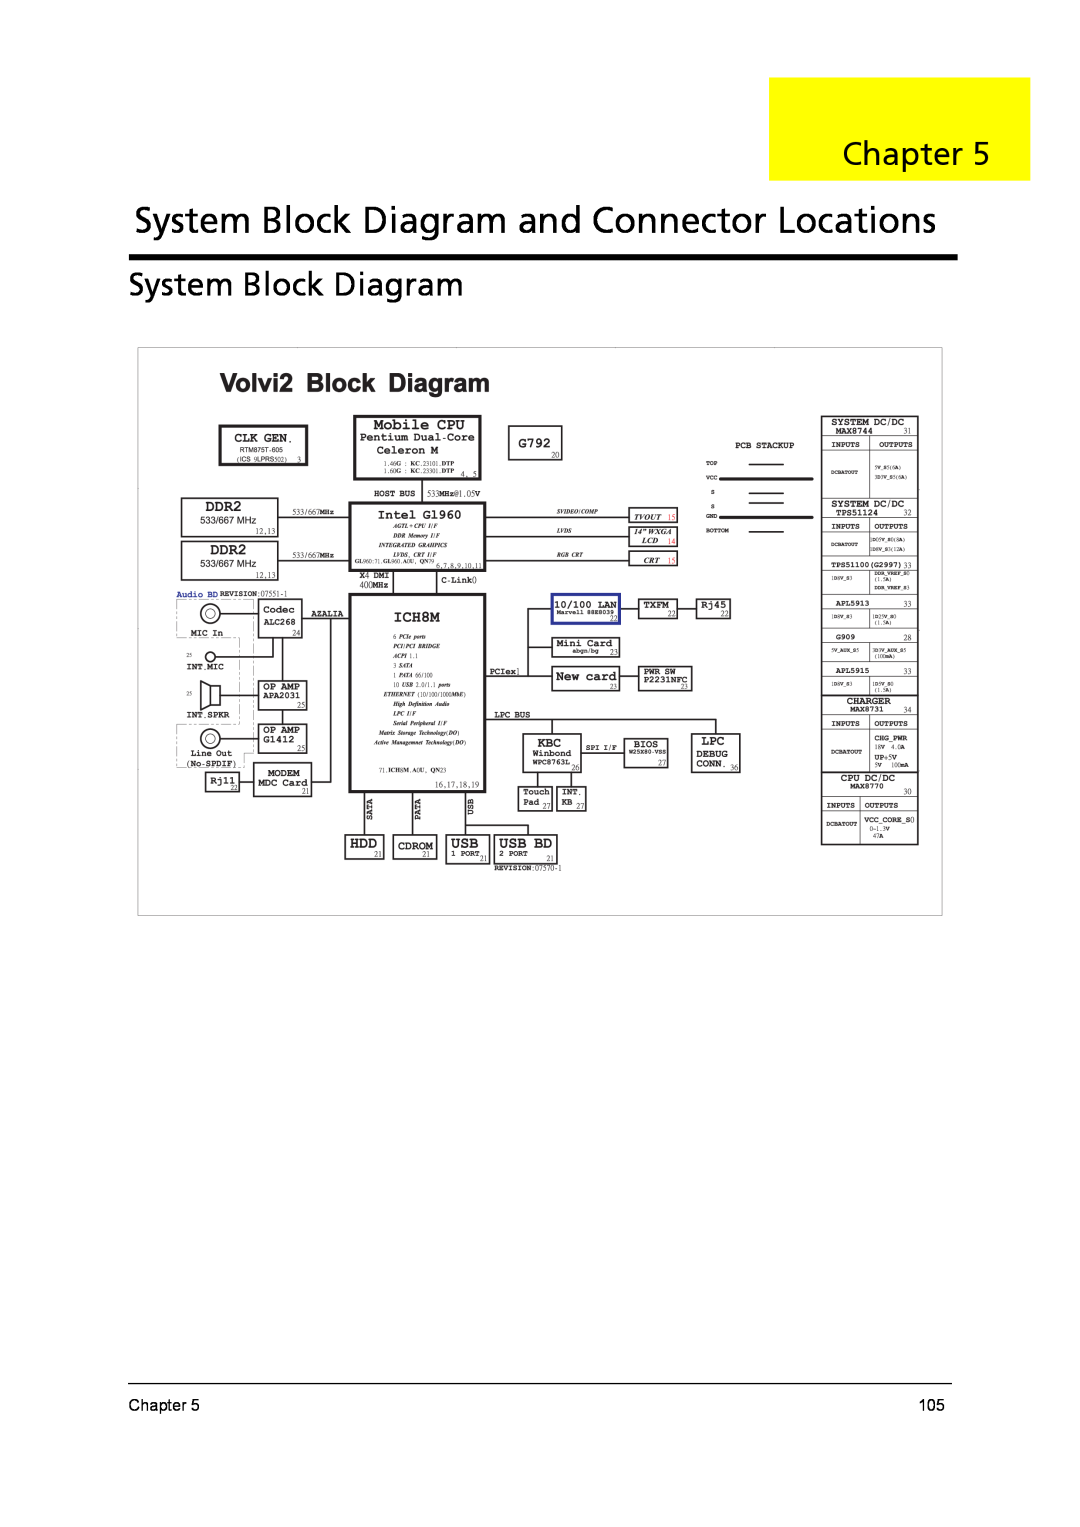 Acer 4315 manual System Block Diagram and Connector Locations, Chapter 